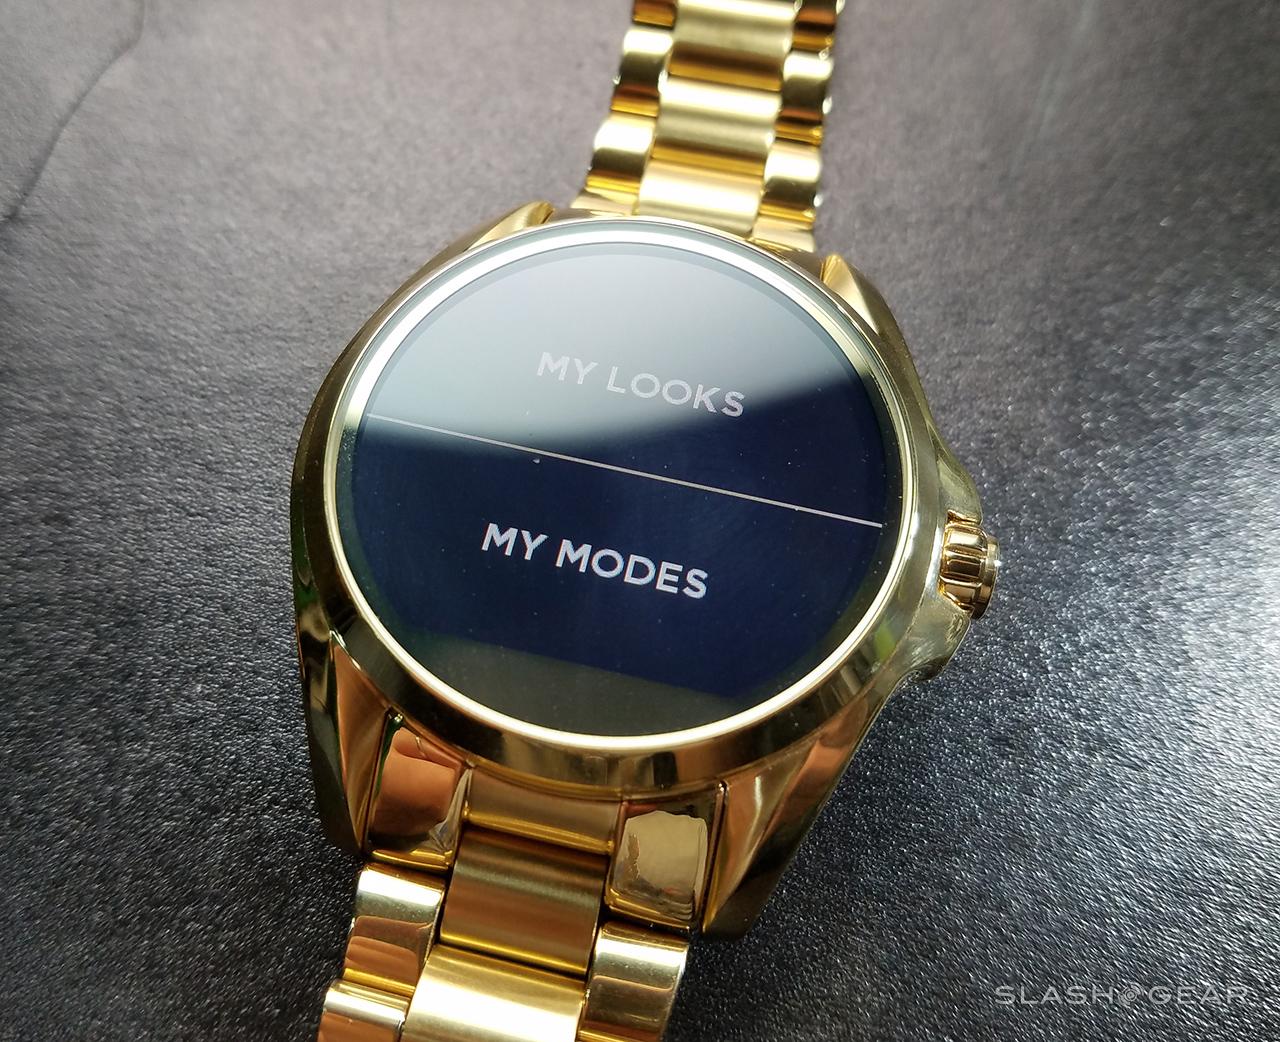 michael kors android watch price